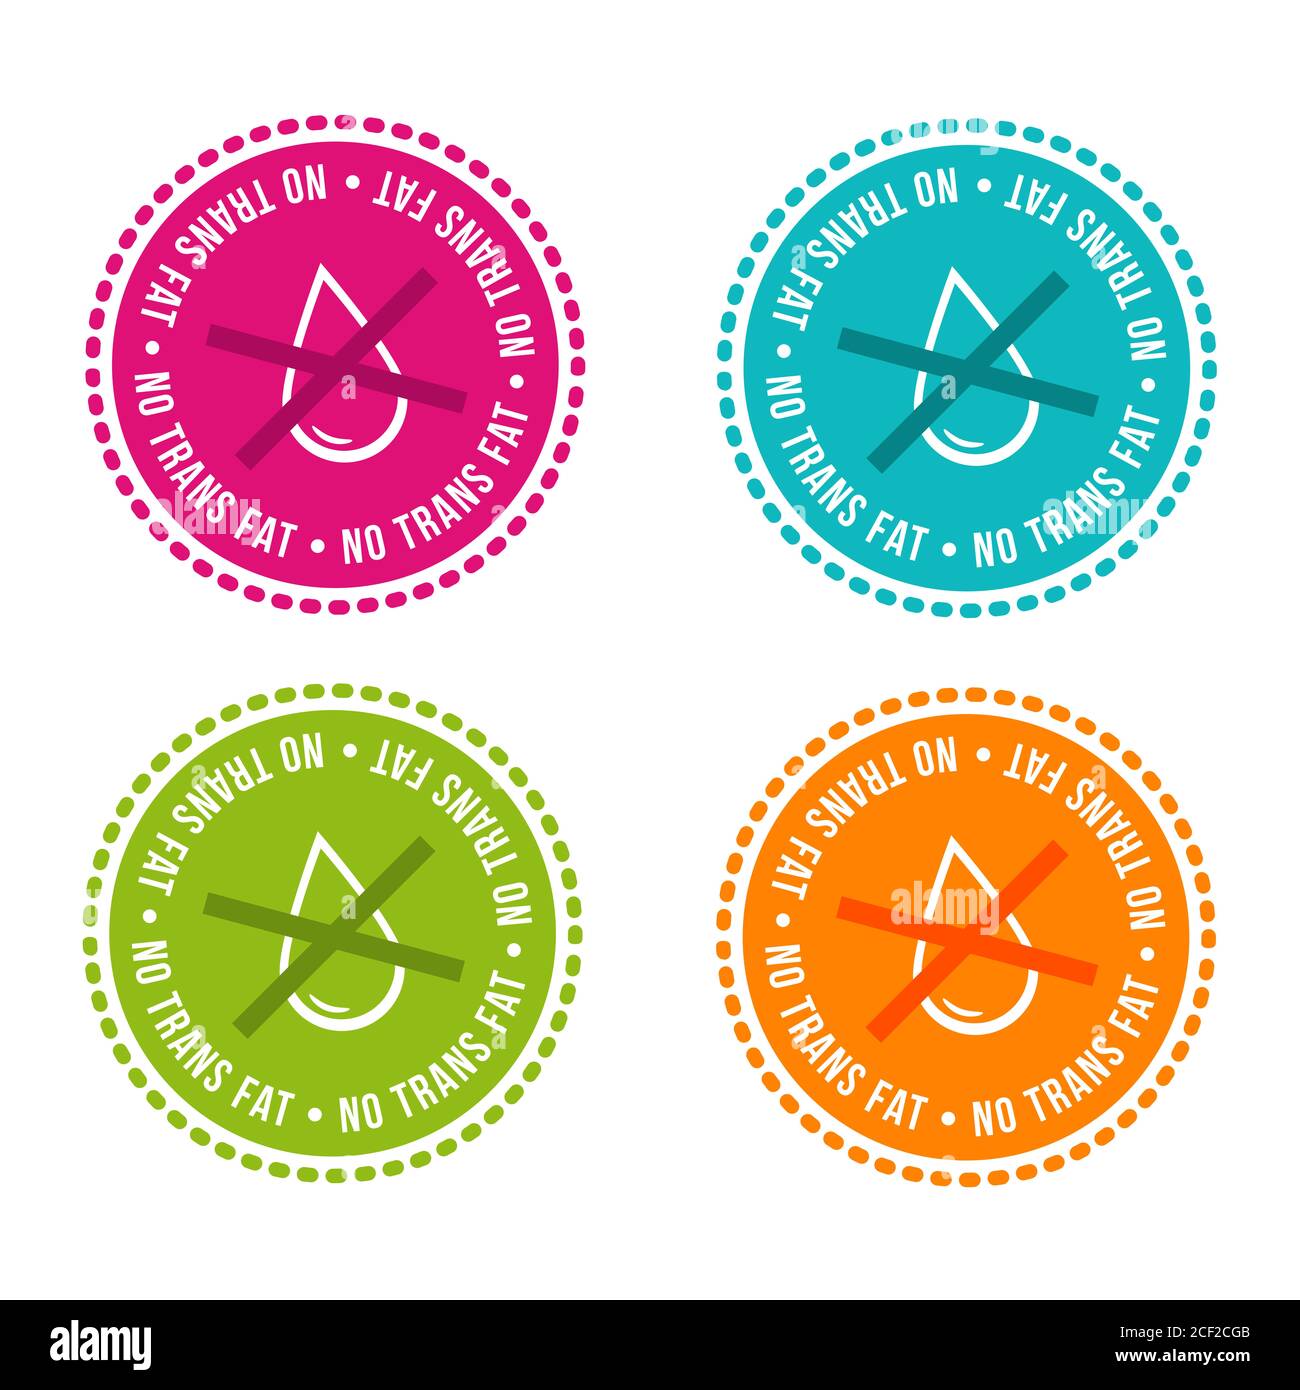 Set of Allergen free Badges. No trans fat. Vector hand drawn Signs. Can be used for packaging Design. Stock Photo